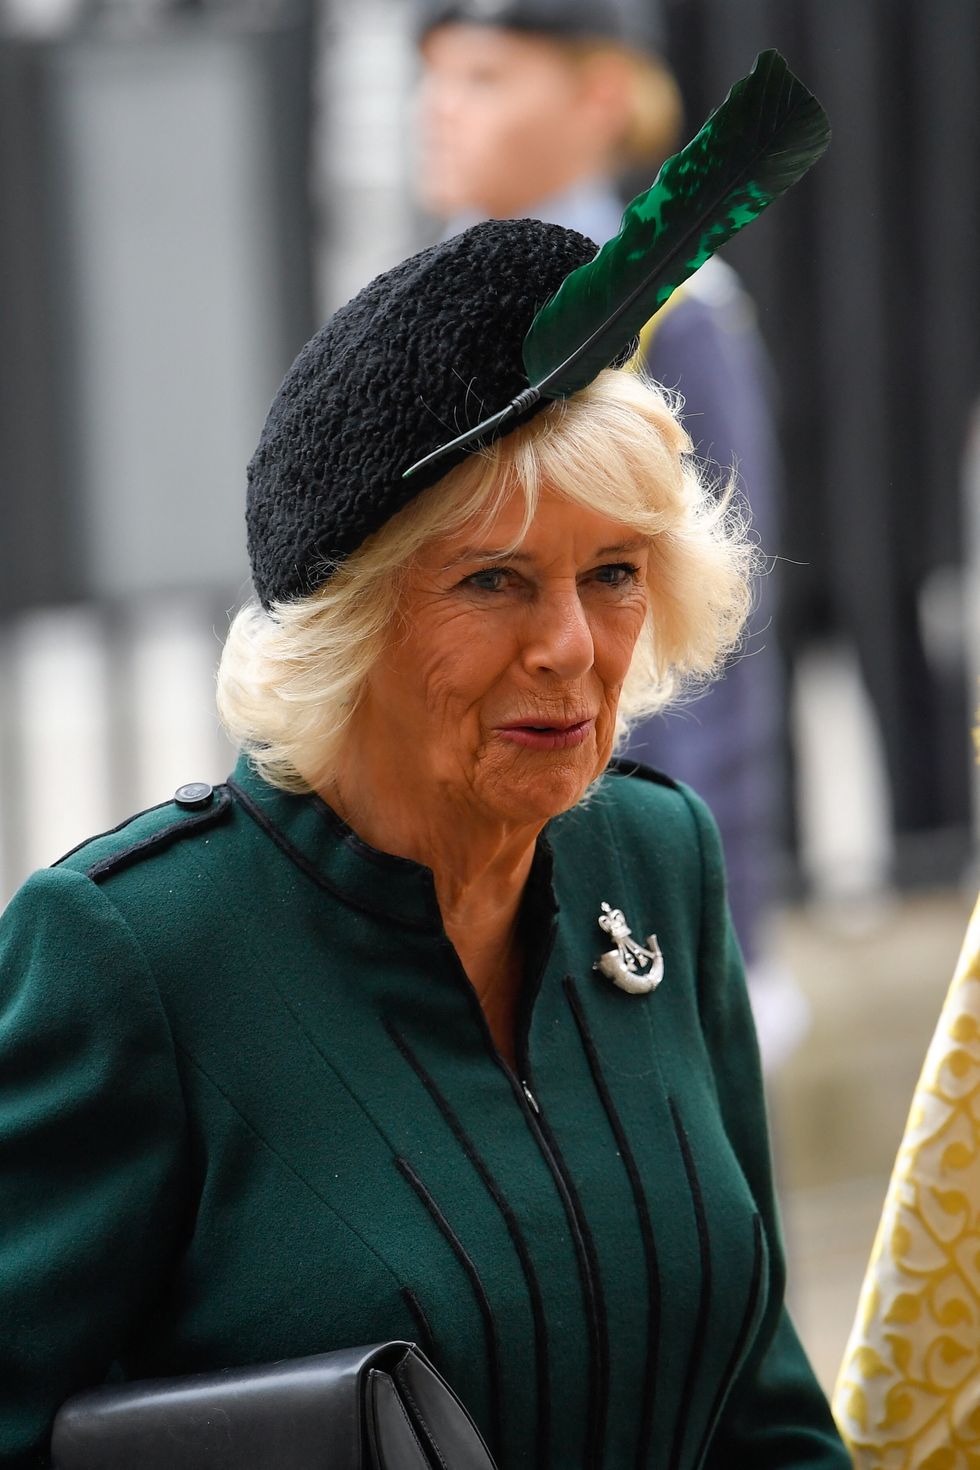 Camilla has cancelled another Royal Family engagement as she continues to recover from Covid.